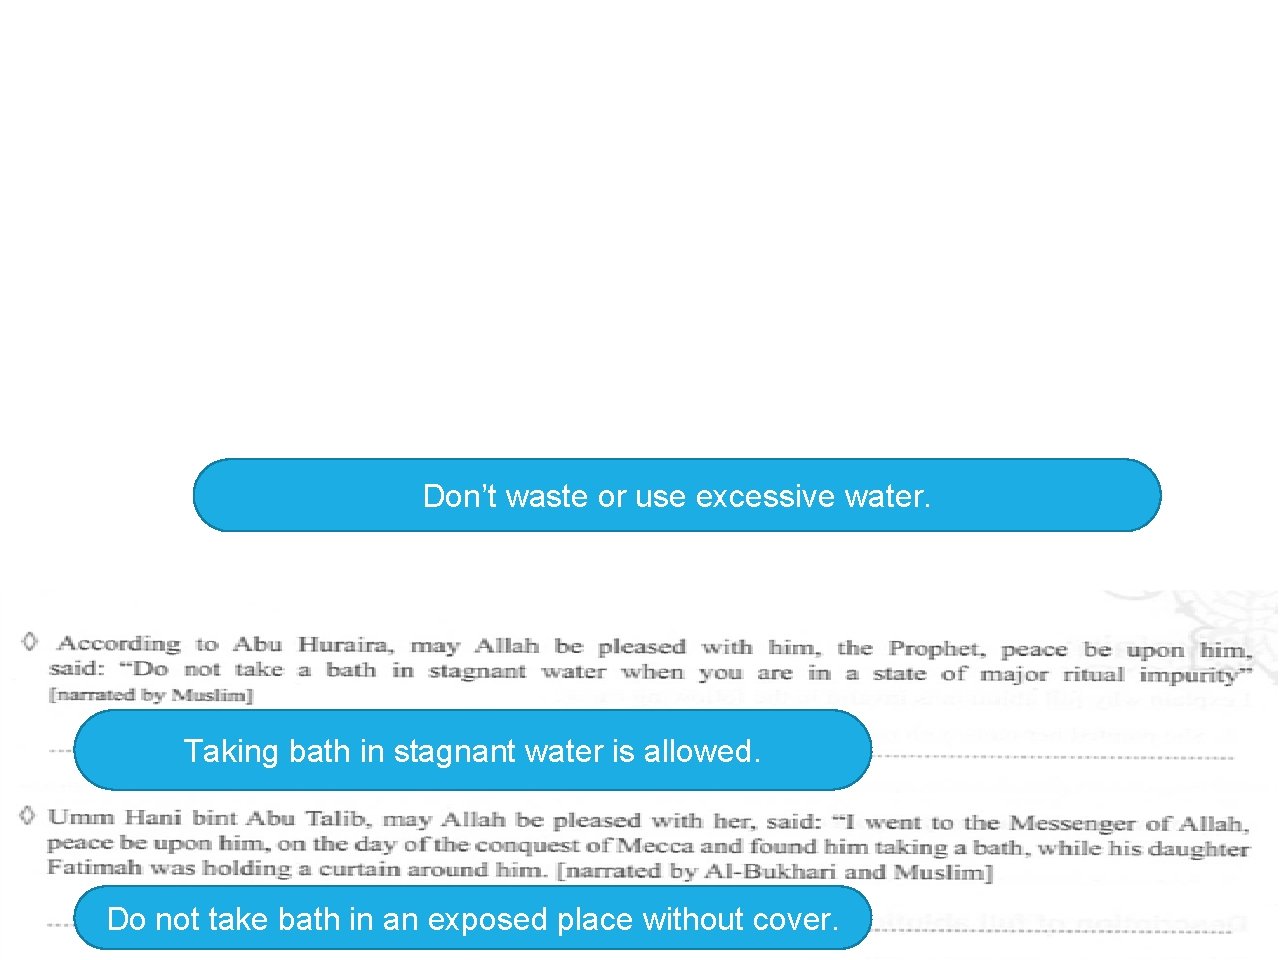 Don’t waste or use excessive water. Taking bath in stagnant water is allowed. Do